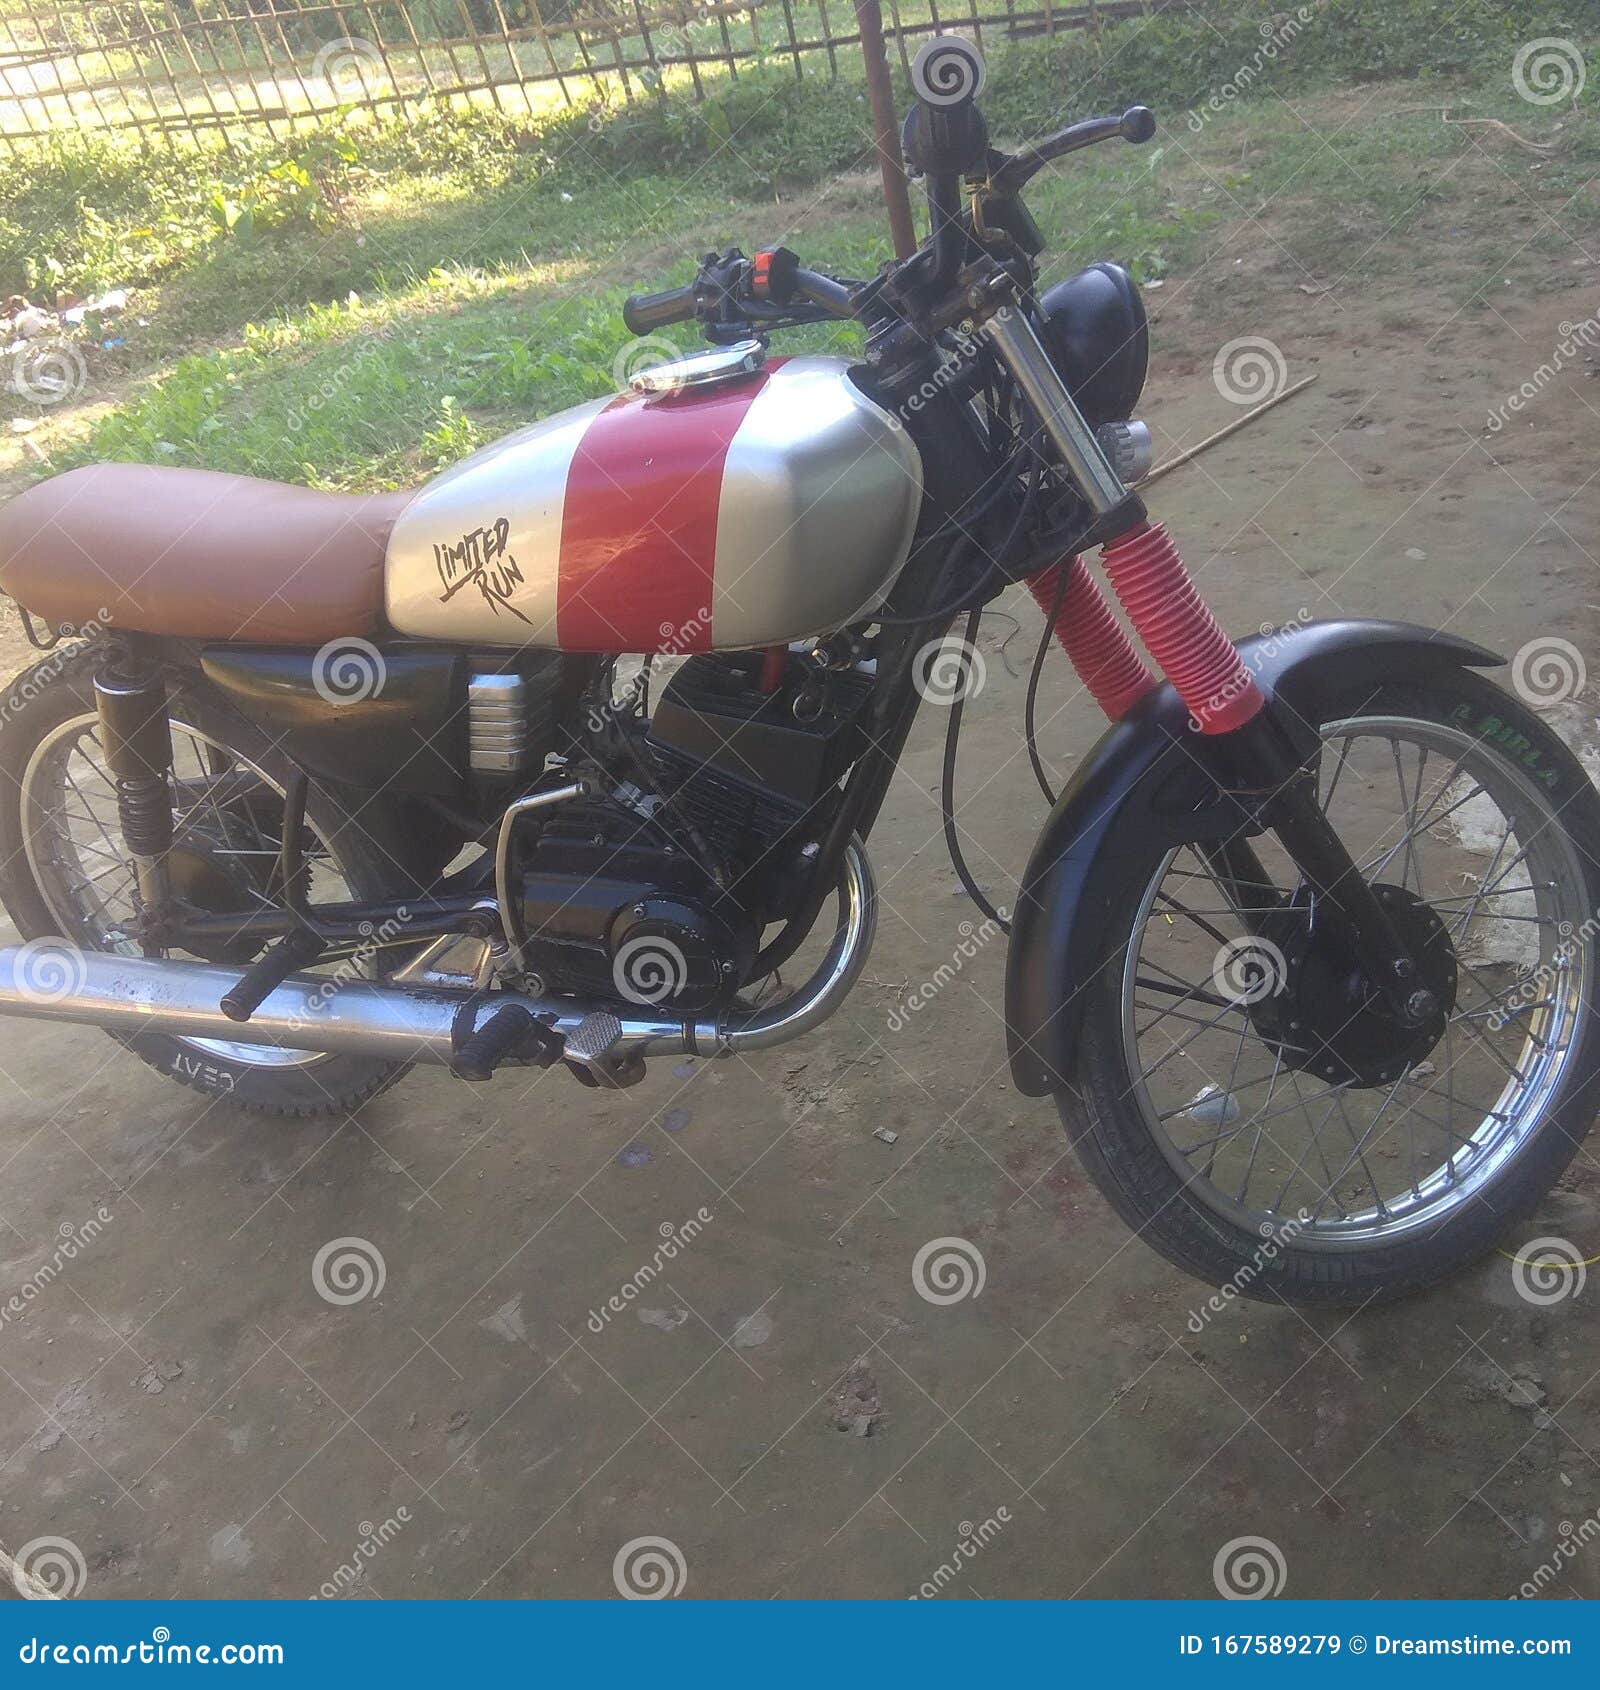 Indian Rx100 Bike Full Modified In Home Full Indian Editorial Stock Image Image Of Full Indian